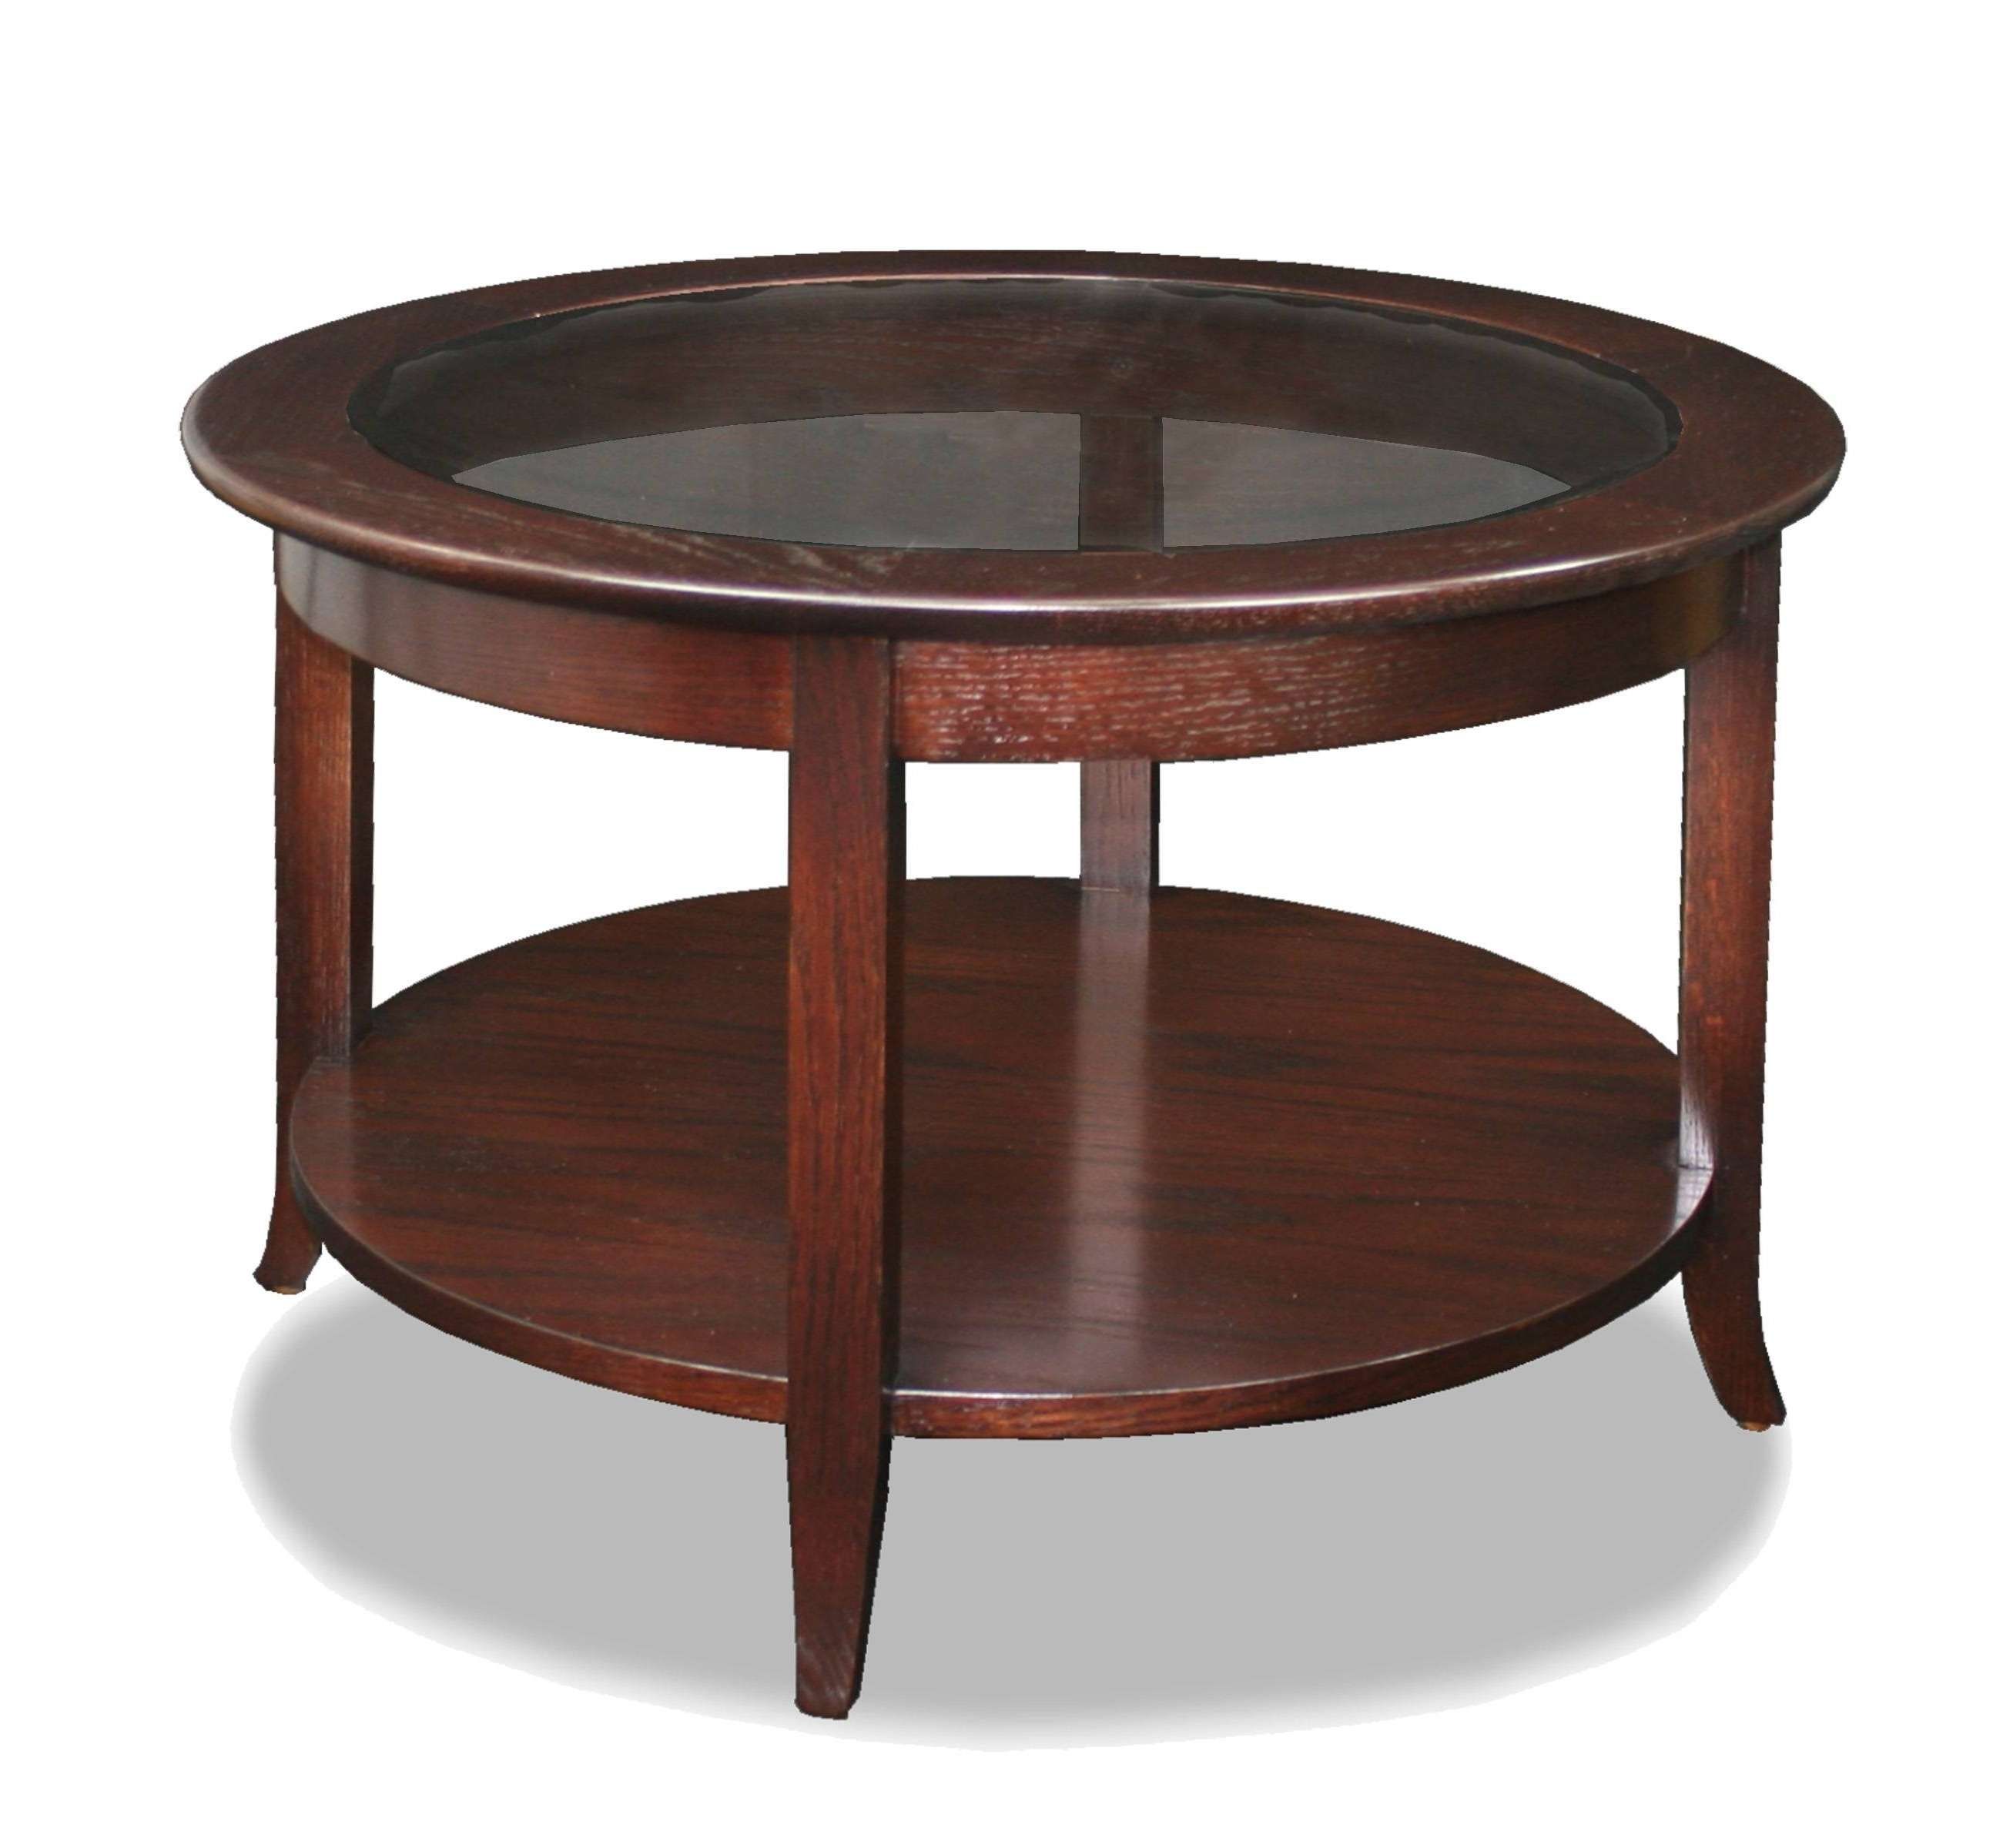 Newest Rounded Corner Coffee Tables With Rounded Corner Coffee Table • Round Table Ideas (View 12 of 20)